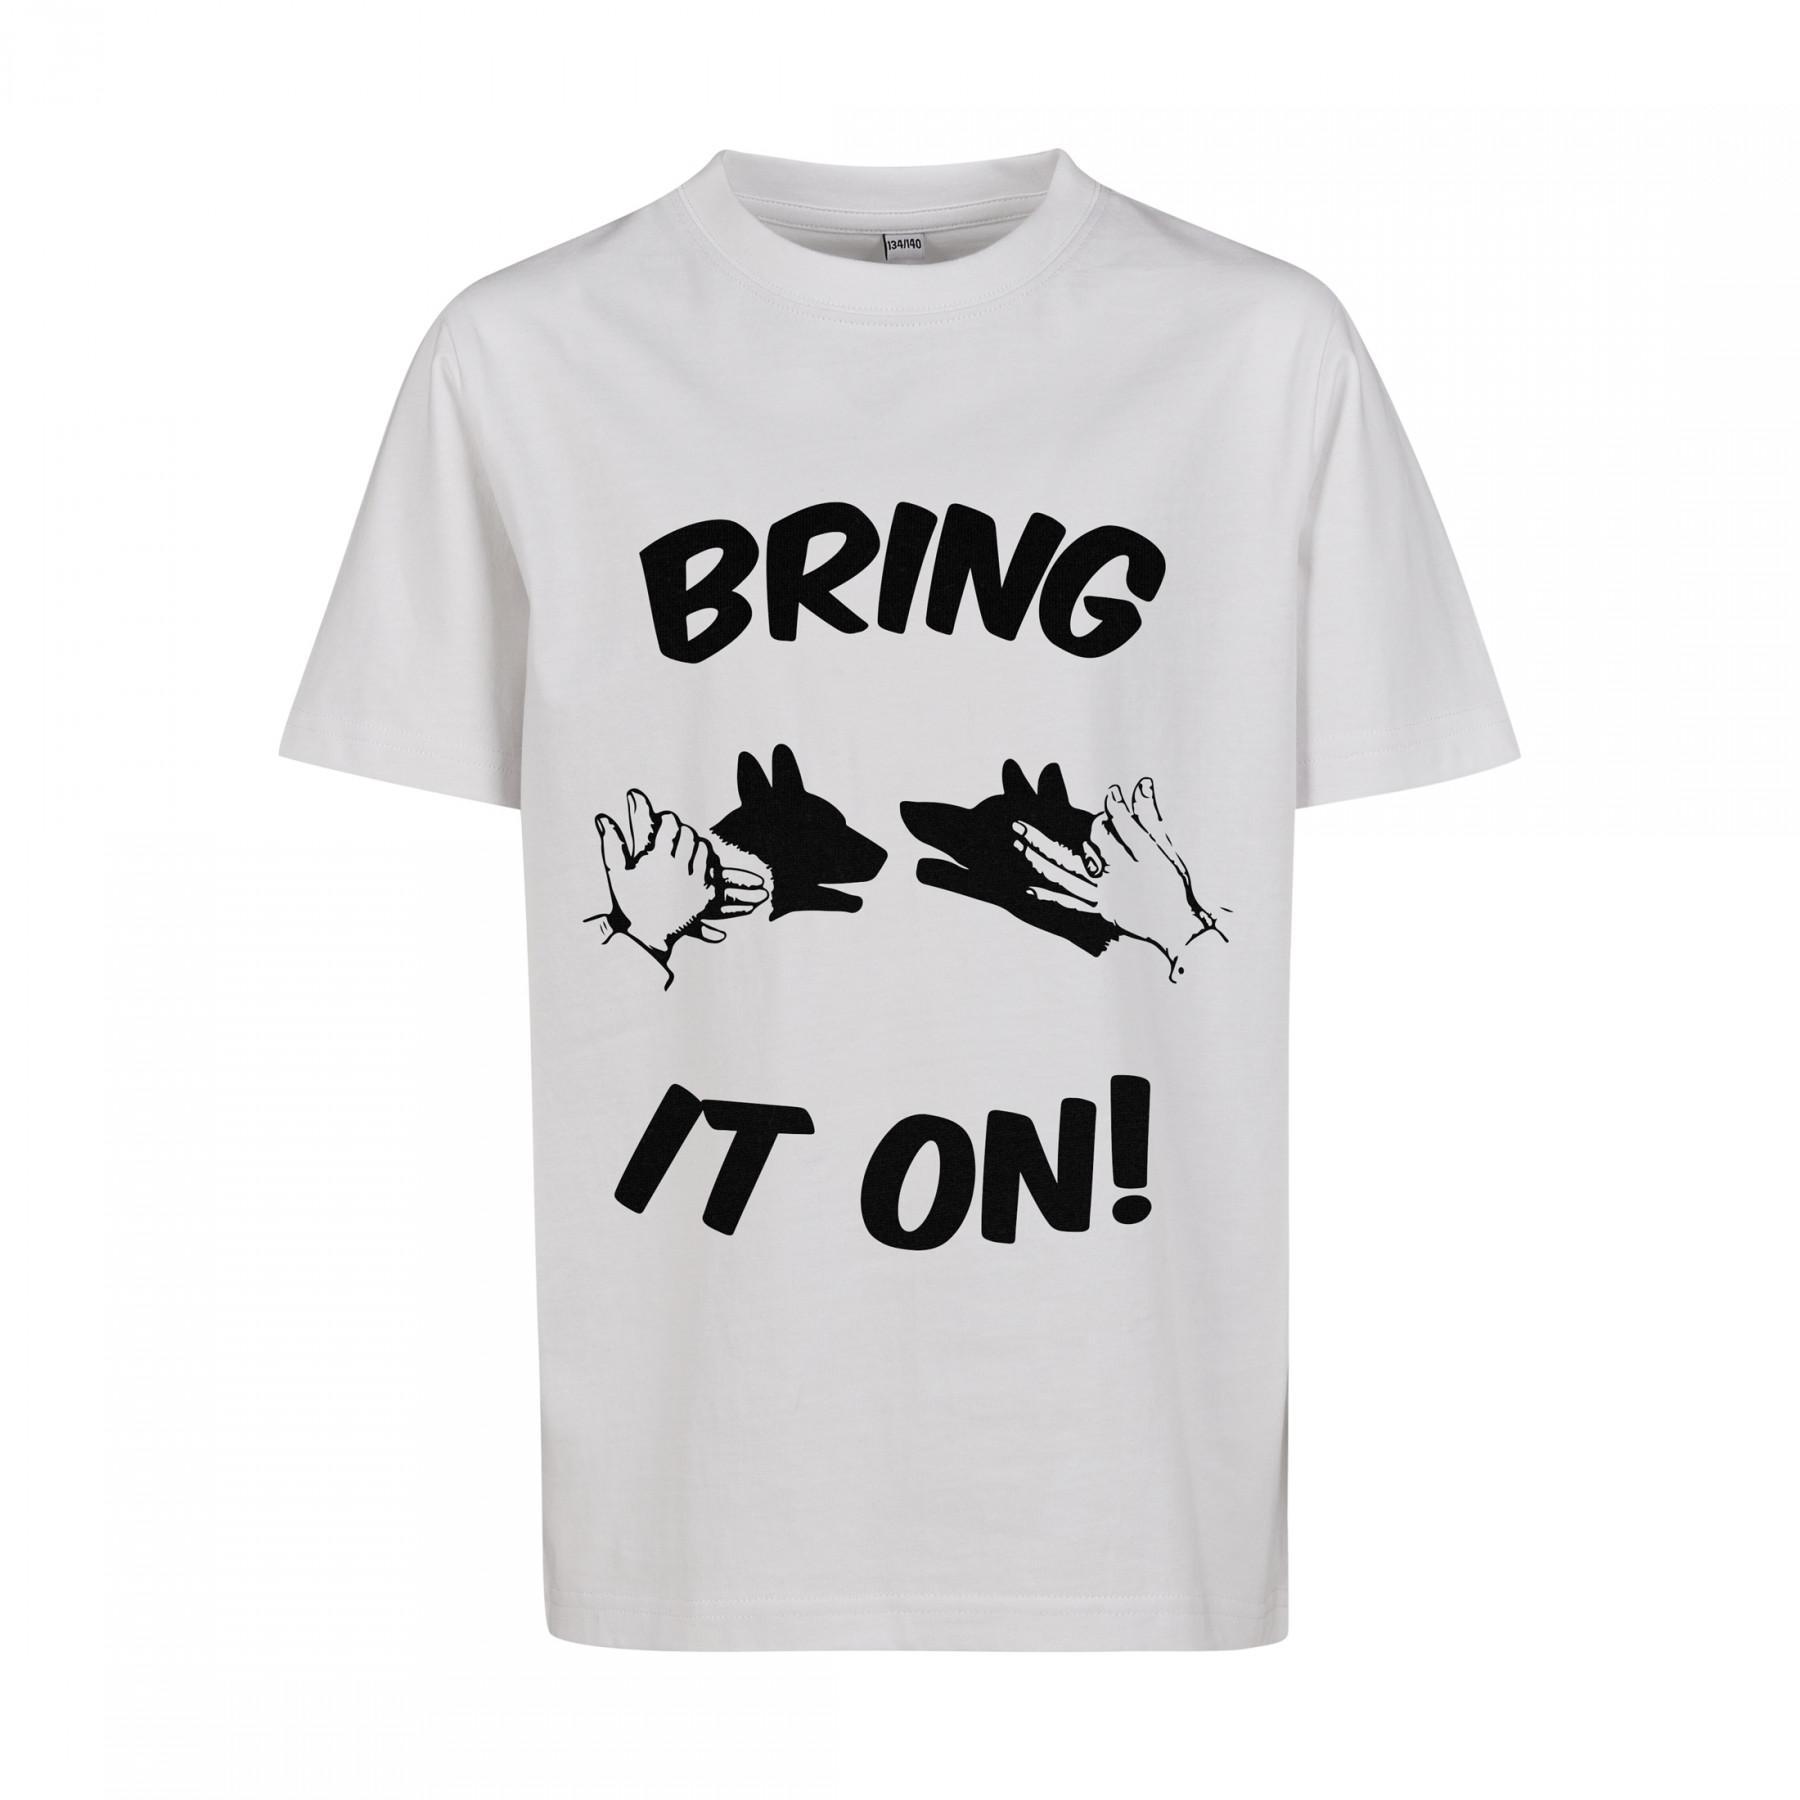 T-shirt per bambini Mister Tee bring it on